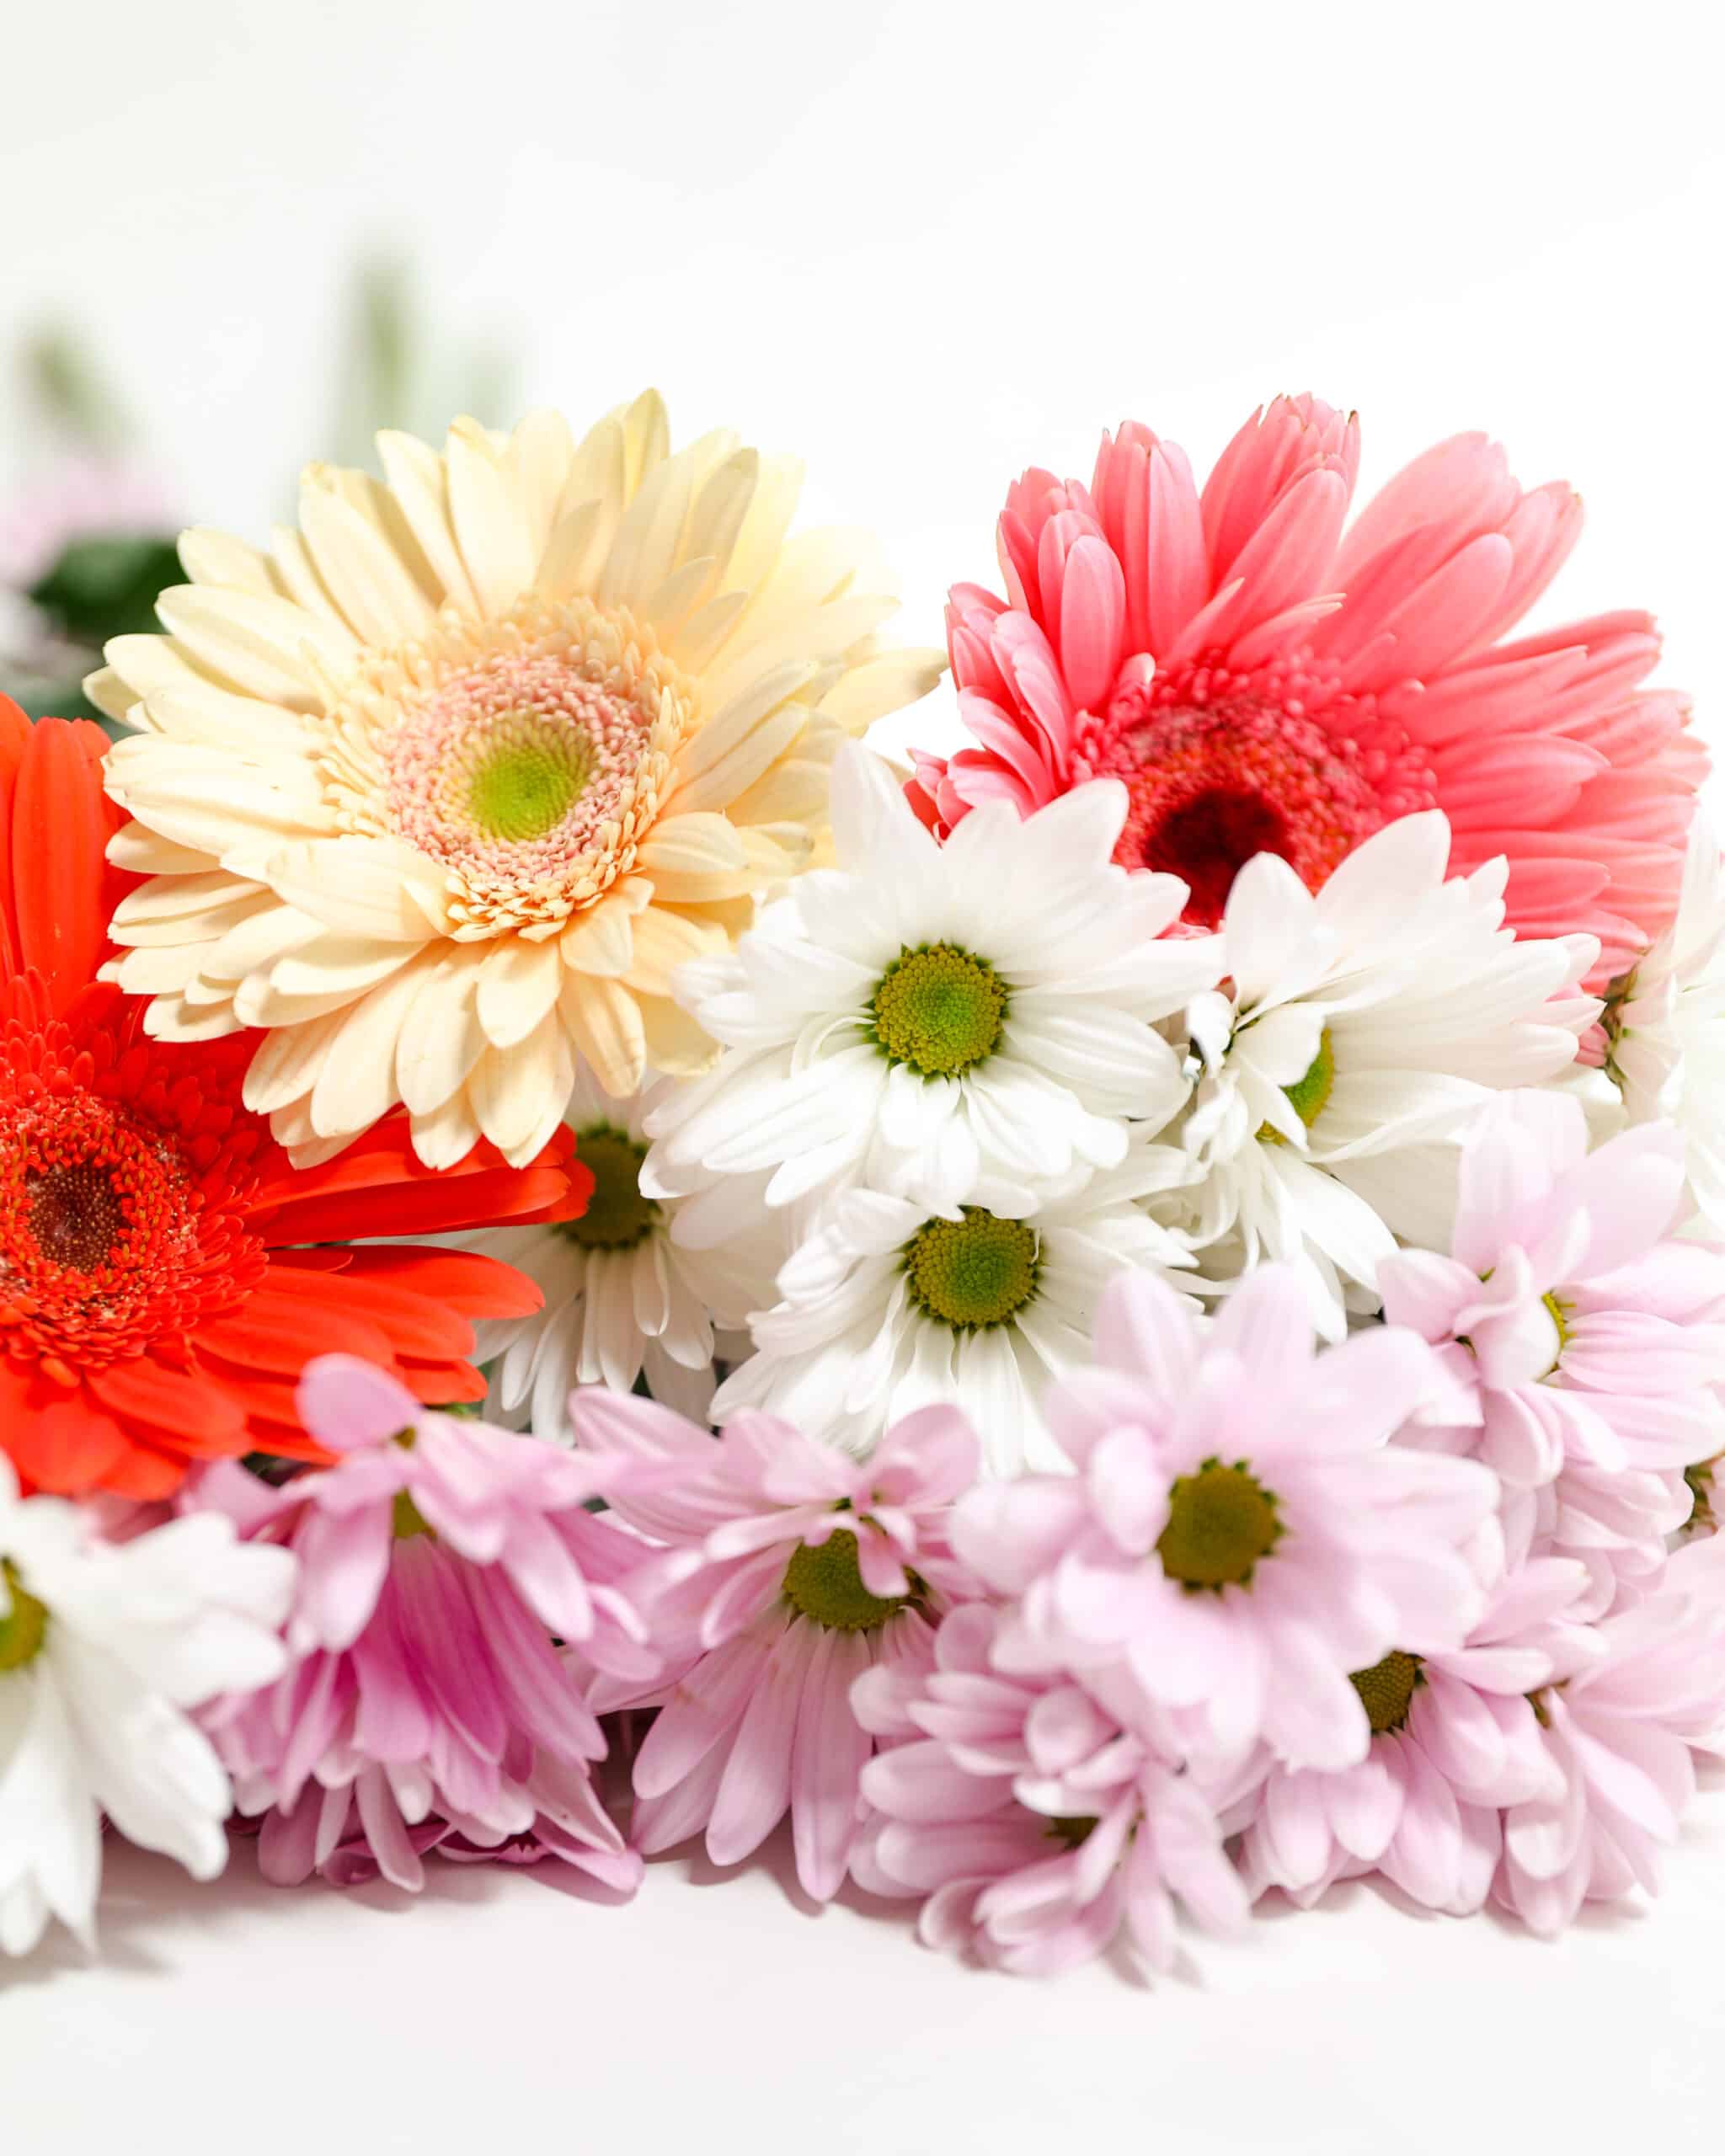 white and pink Daisy flowers and red, pink, and peach gerbera daisies